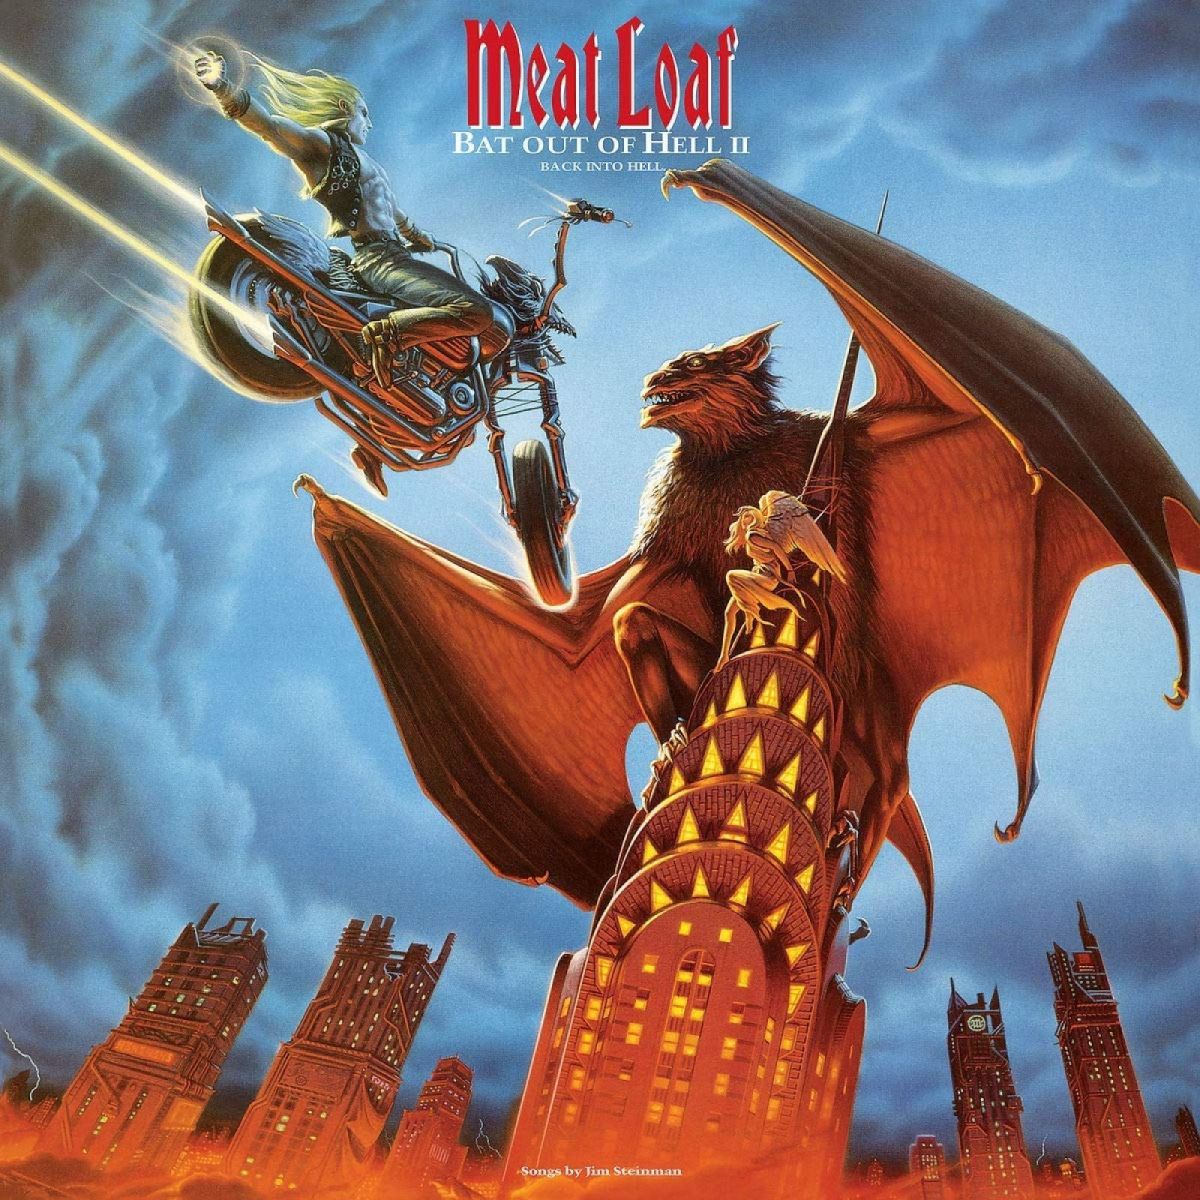 Couverture de l'album "Bat Out of Hell II : Back into Hell".